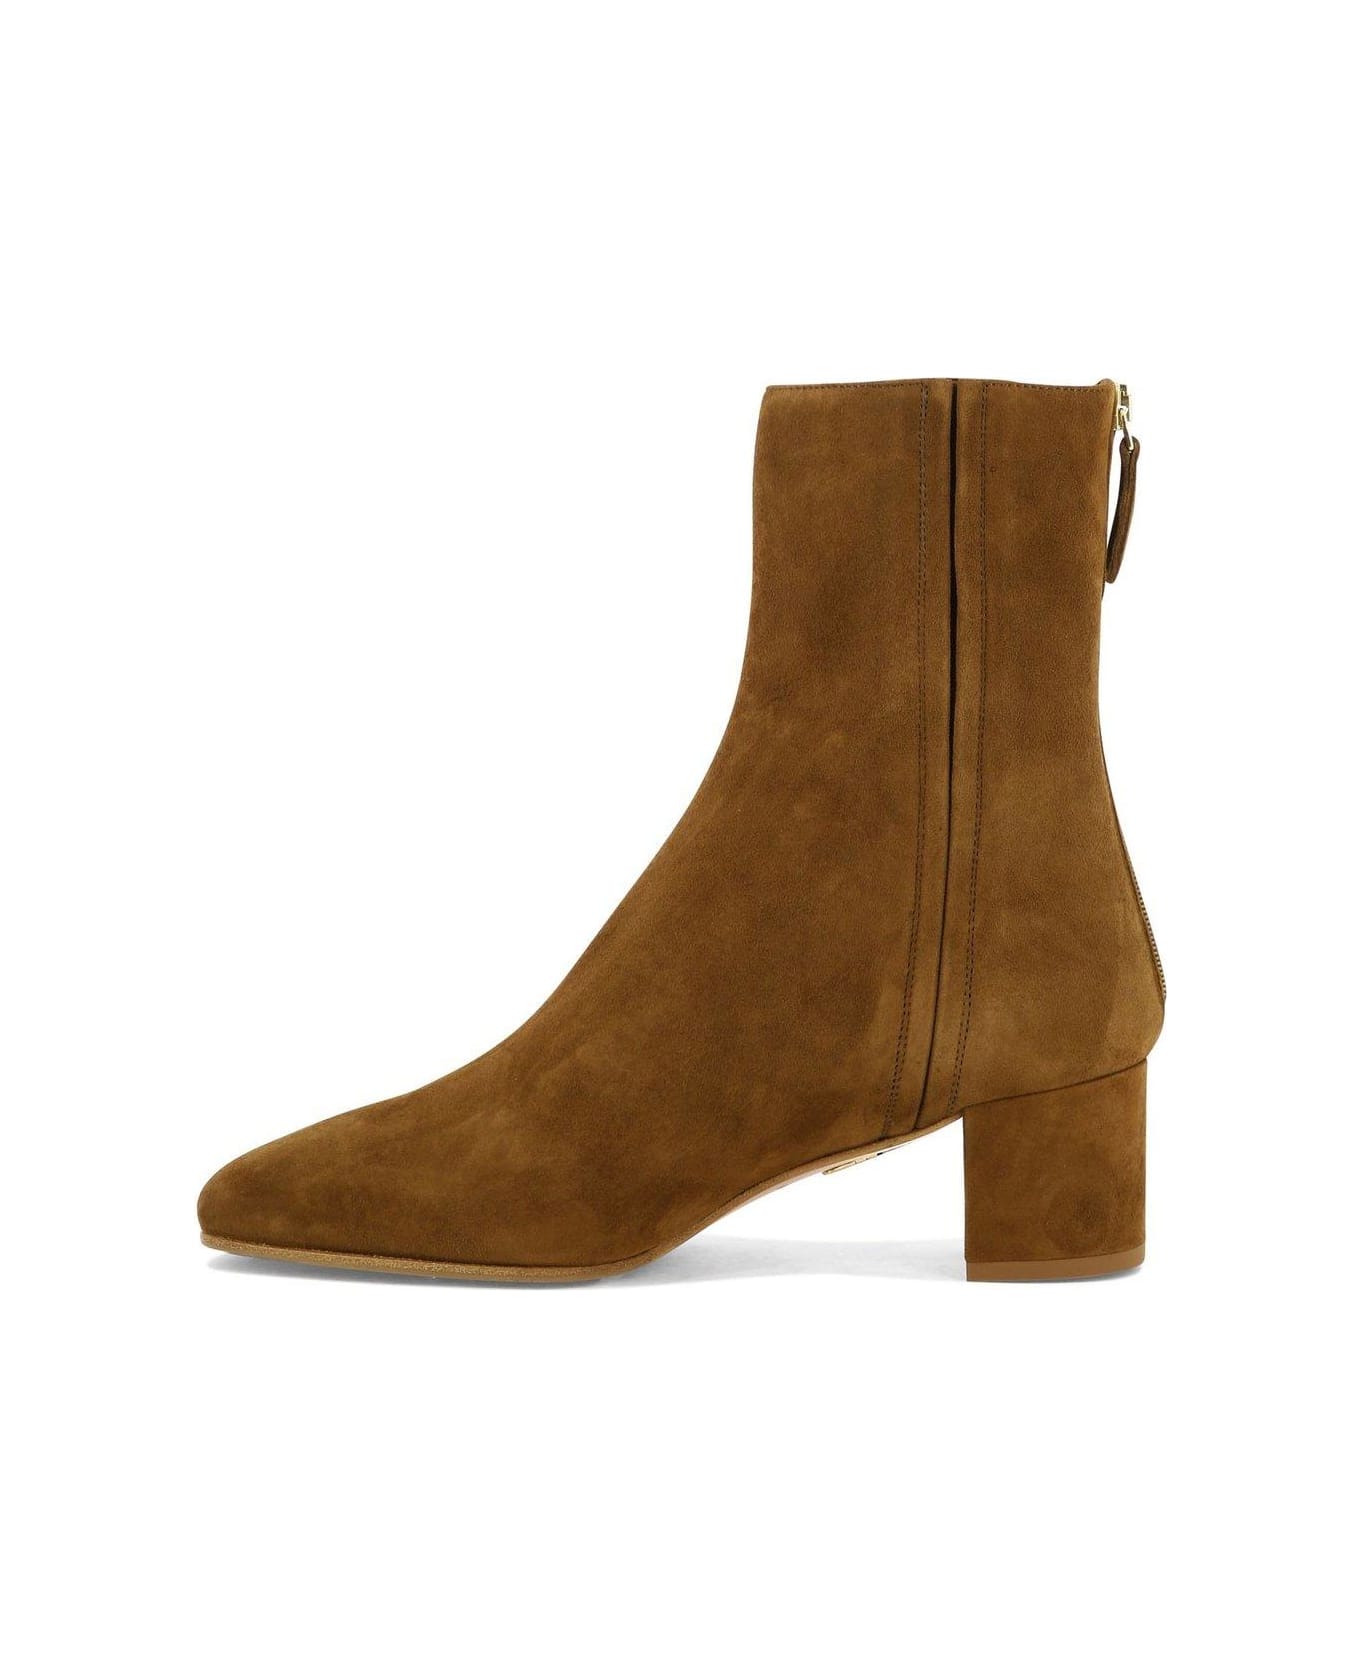 Aquazzura Groovie Zipped Ankle Boots - Brown